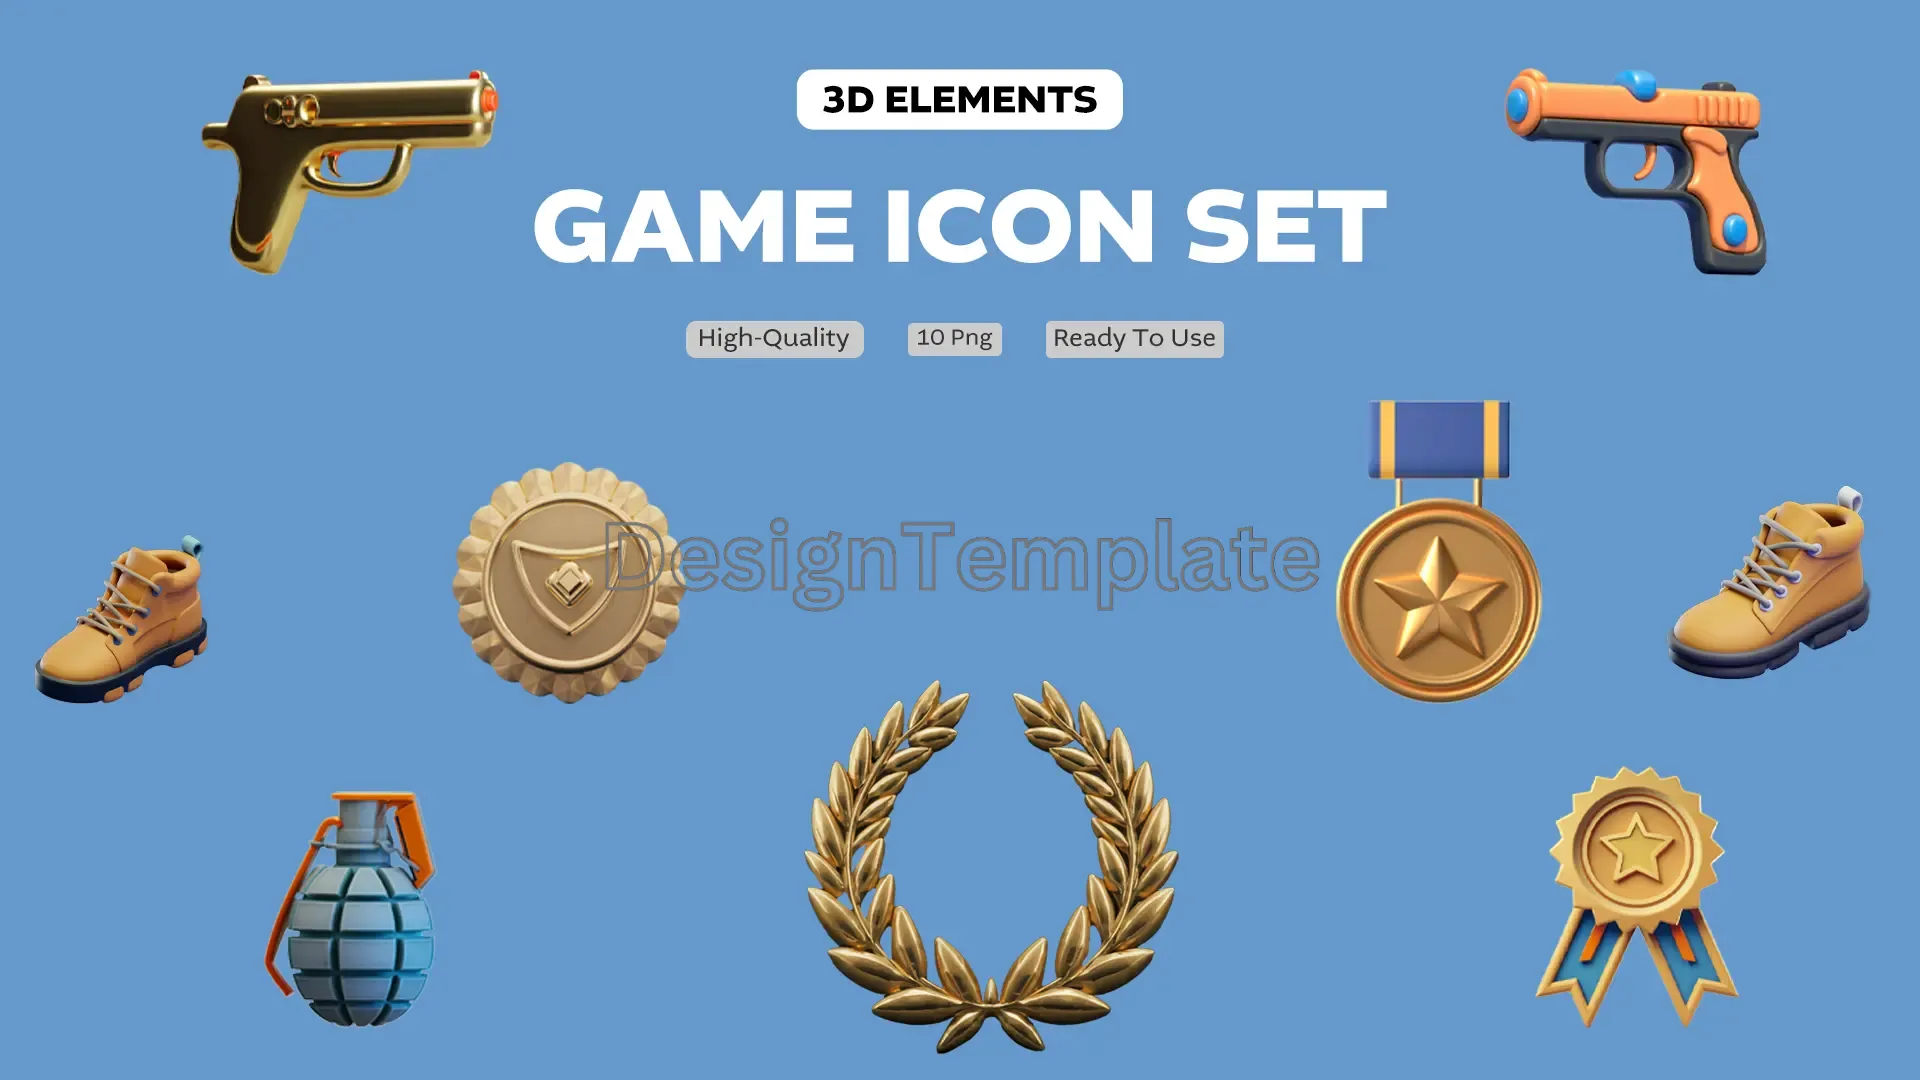 Game Icon Set 3D Elements Collection image